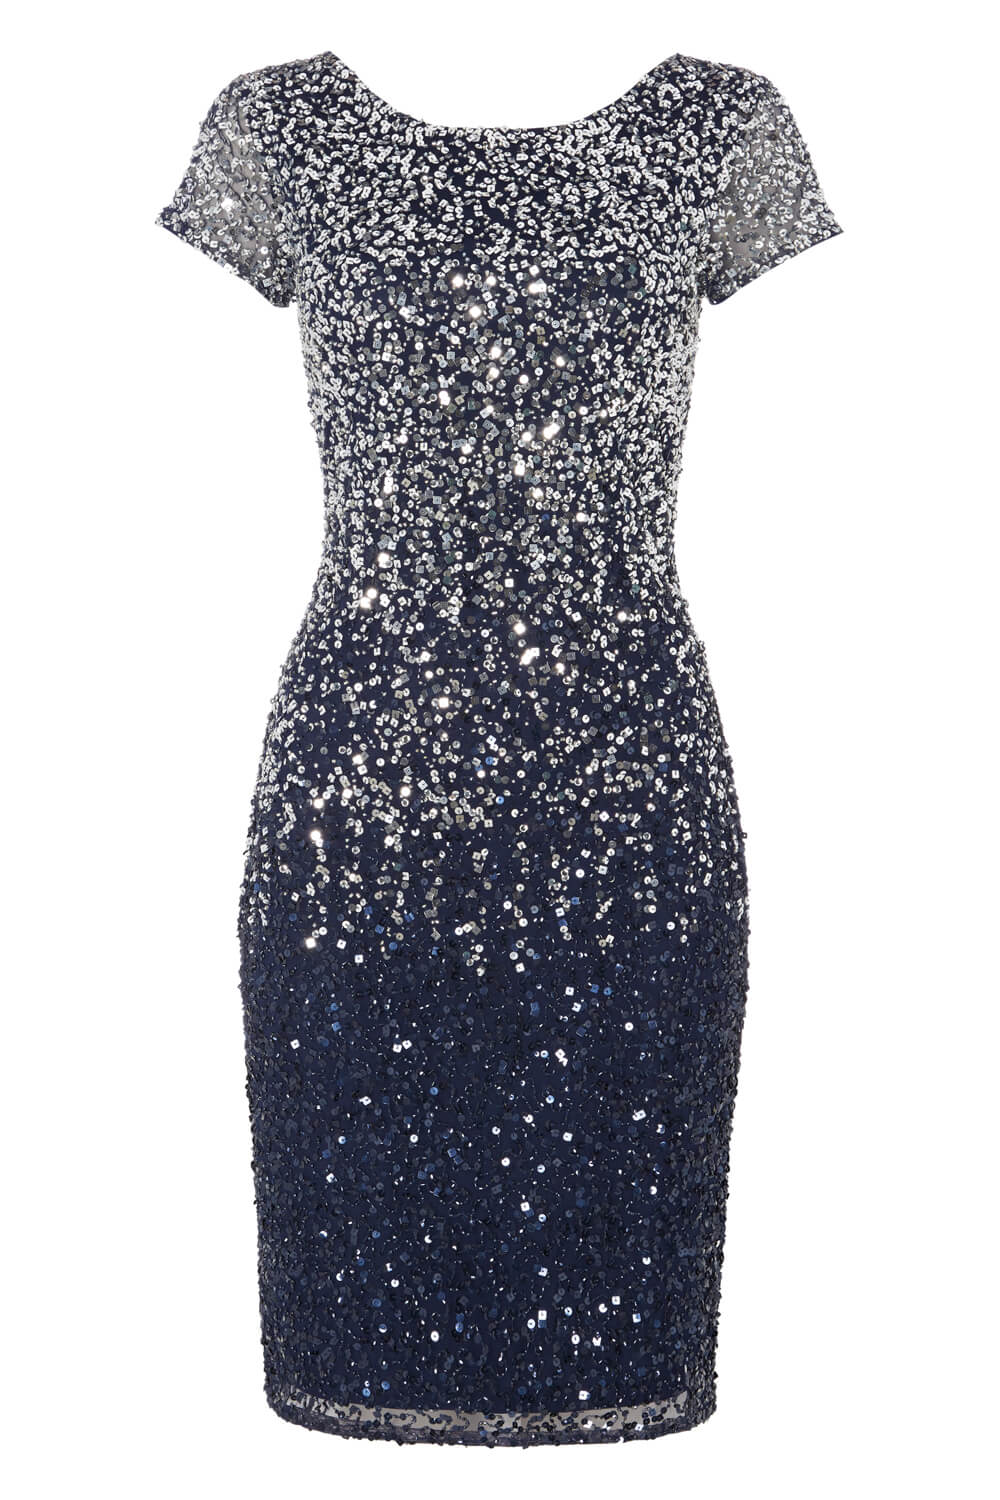 Midnight Blue Ombre Sequin Shift Dress, Image 4 of 4